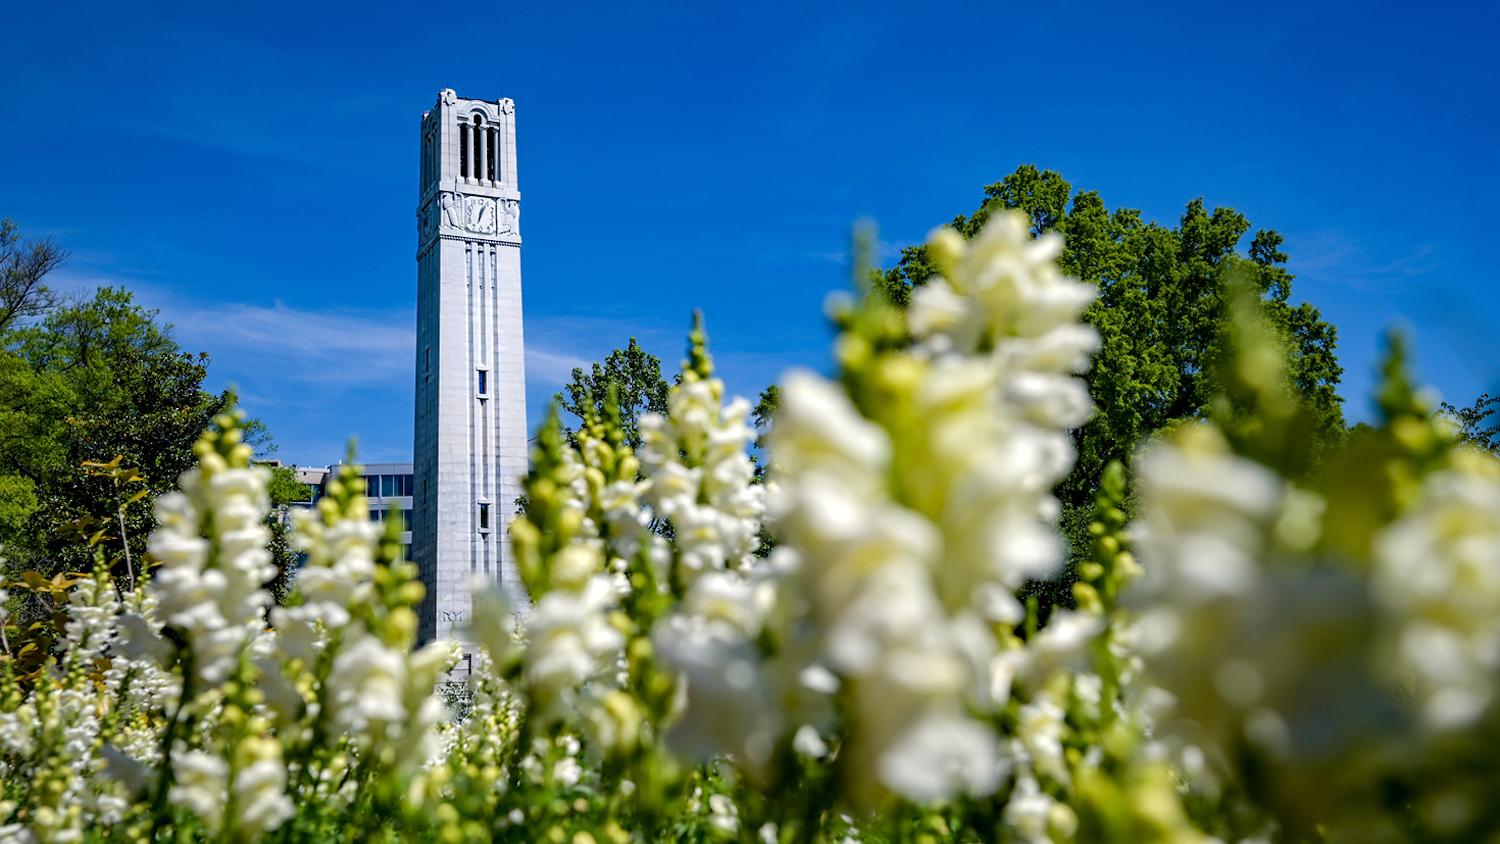 The Memorial Belltower and flowers